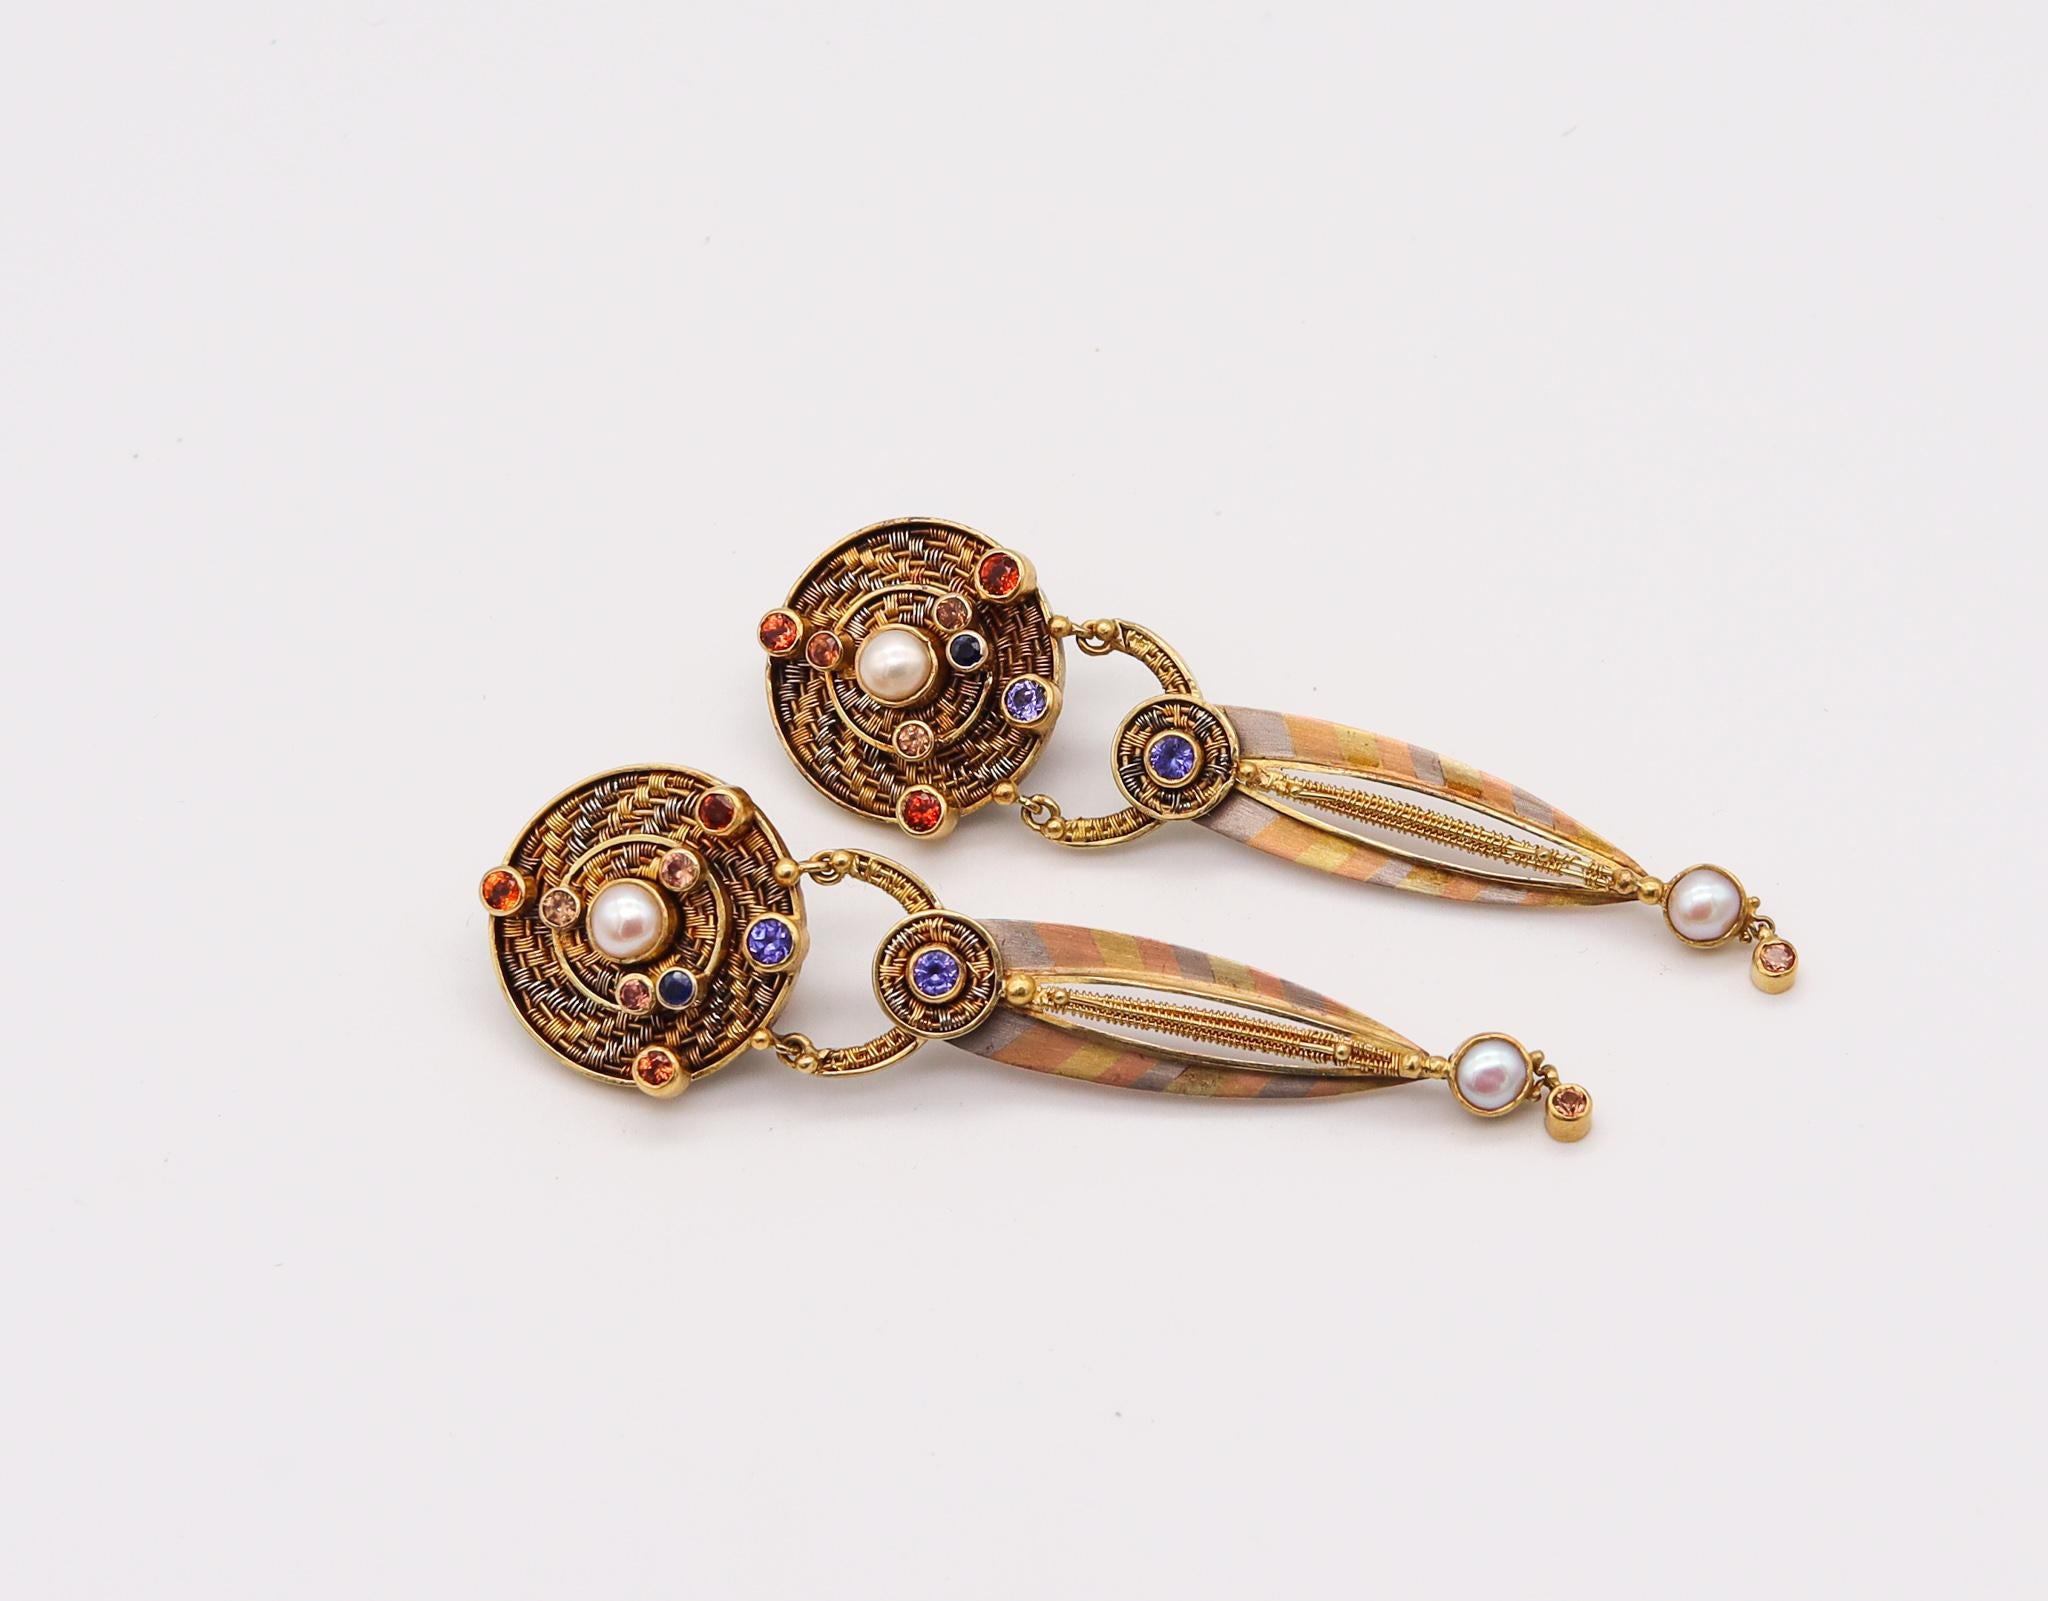 Drop earrings designed by Vicki Eisenfeld.

Fabulous one of a kind pair of drop earrings, created in Connecticut by the talented studio jewelry designer Vicky Elsenfeld. This beautiful earrings has been carefully crafted with intricate weaving